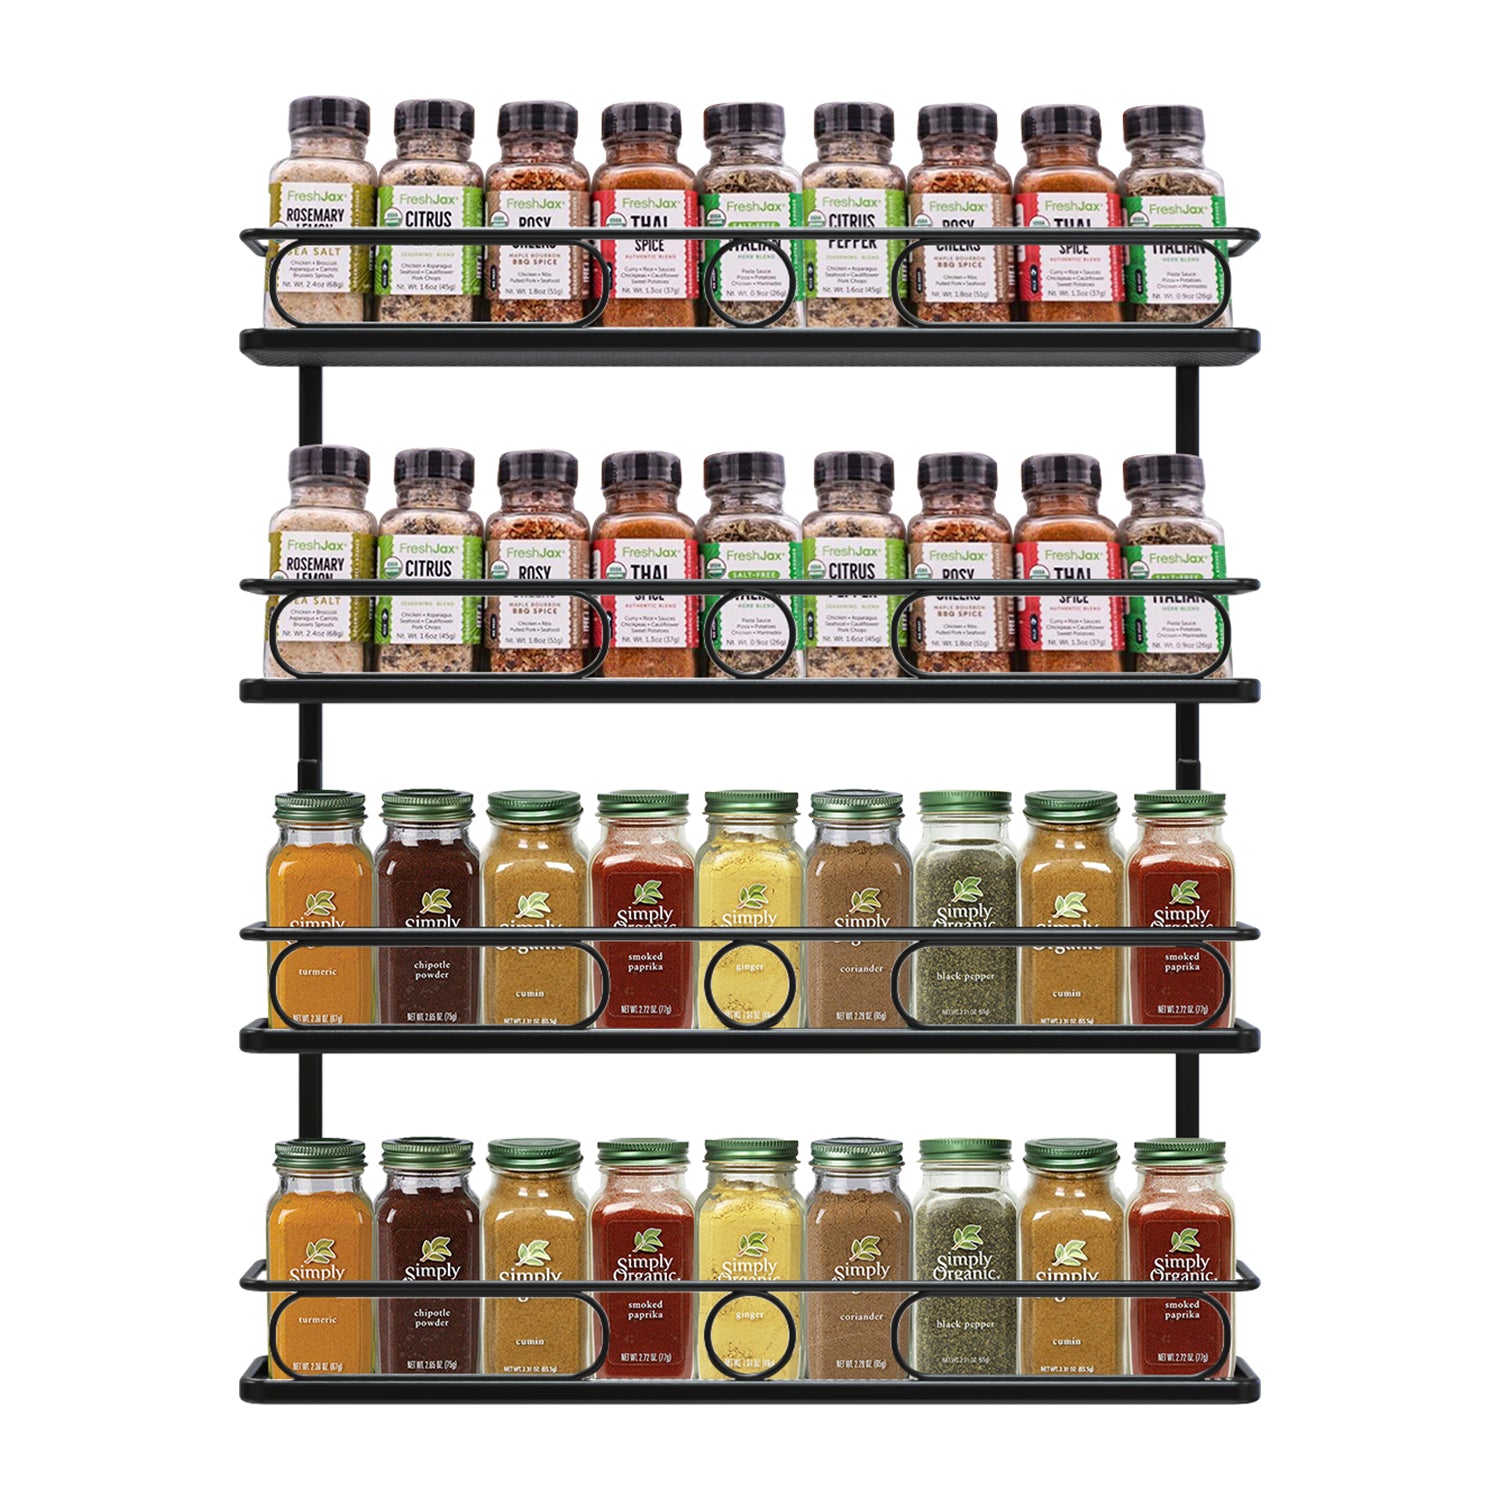 Space Saving Spice Rack Organizer for Cabinets or Wall Mounts - Easy to Install Set of 4 Hanging Racks - Perfect Seasoning Organizer for Your Kitchen